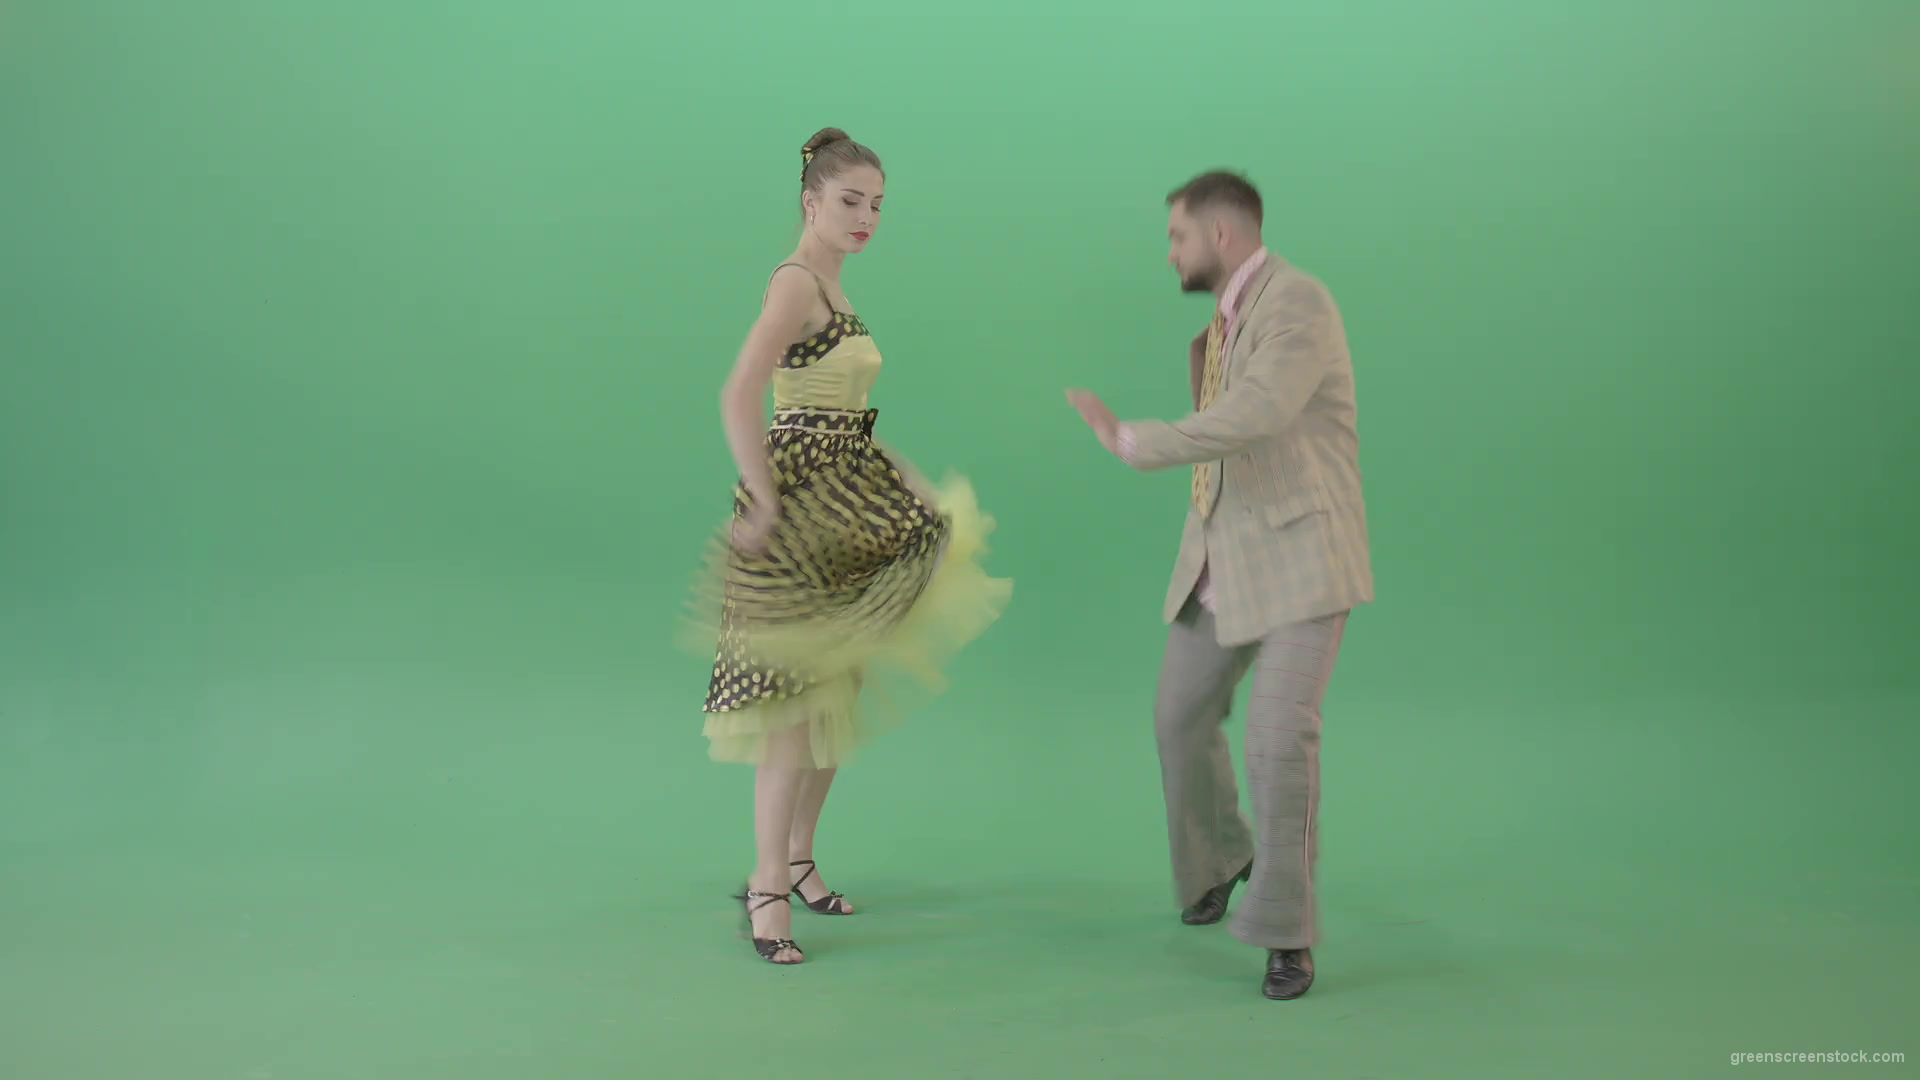 Boy-and-Girl-dancing-Boogie-woogie-and-rockandroll-isolated-on-Green-Screen-4K-Video-Footage-1920_001 Green Screen Stock